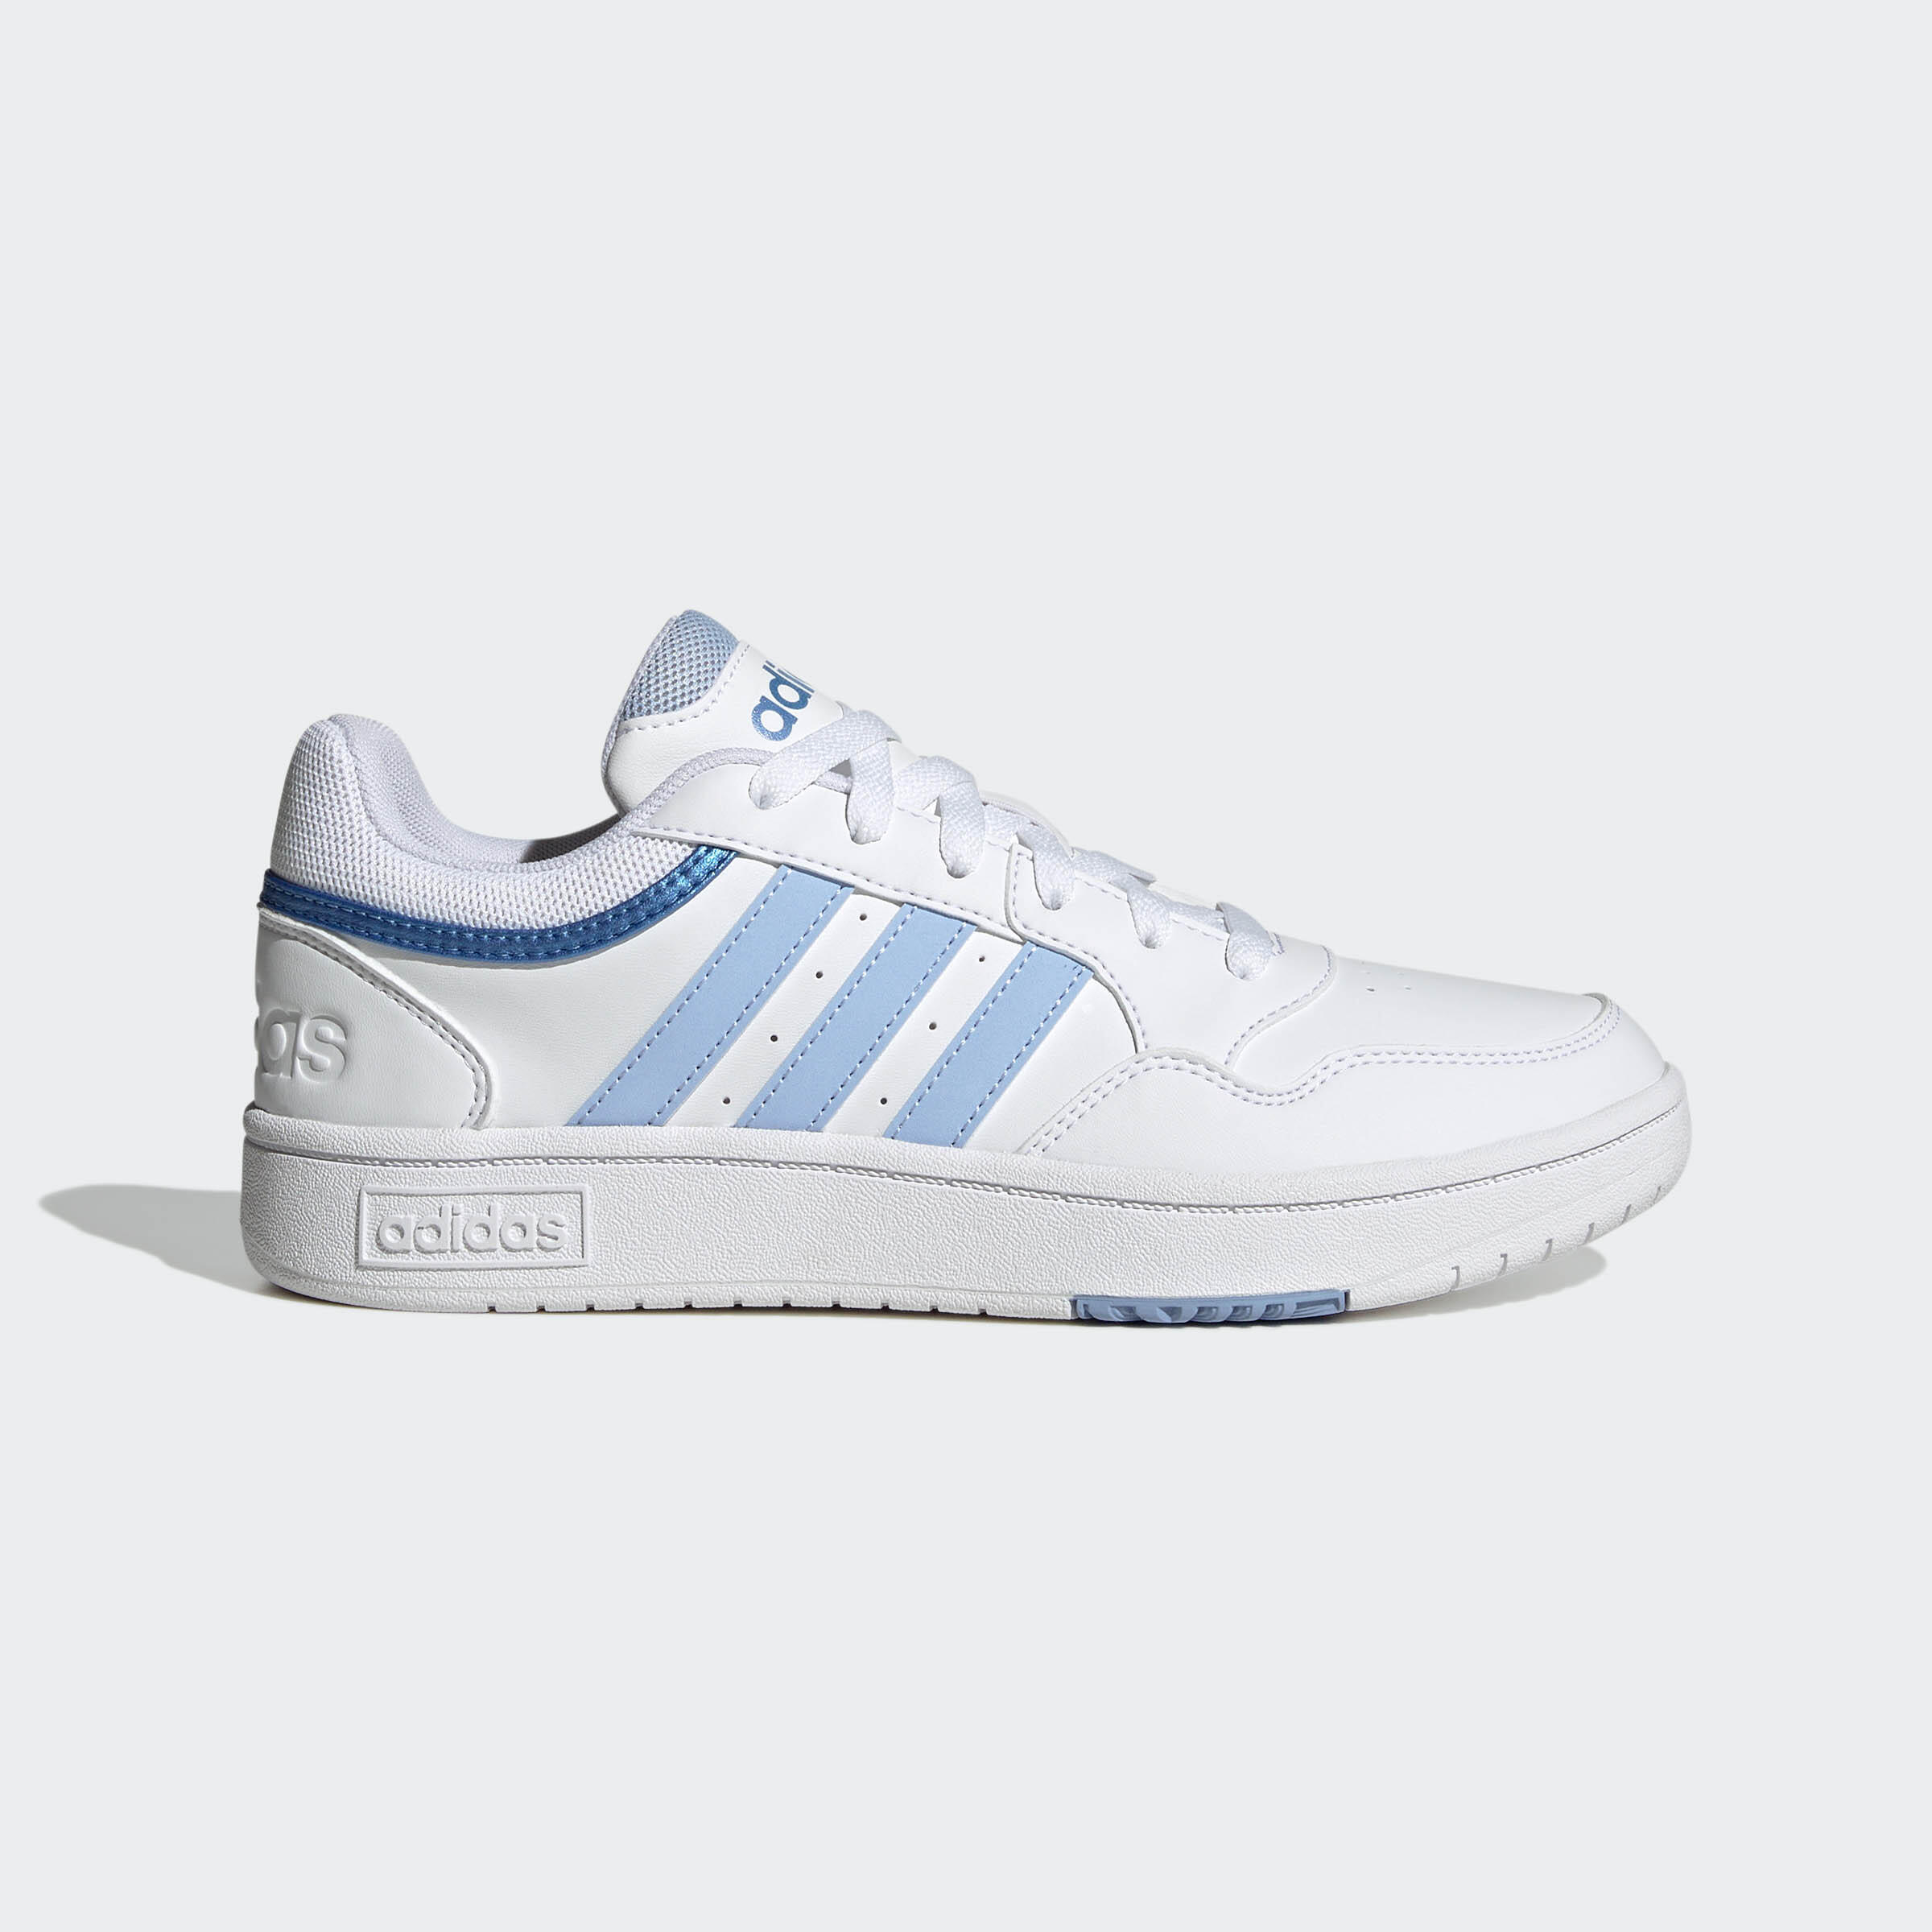 ADIDAS WOMEN'S ADIDAS HOOPS 3.0 SHOES - WHITE